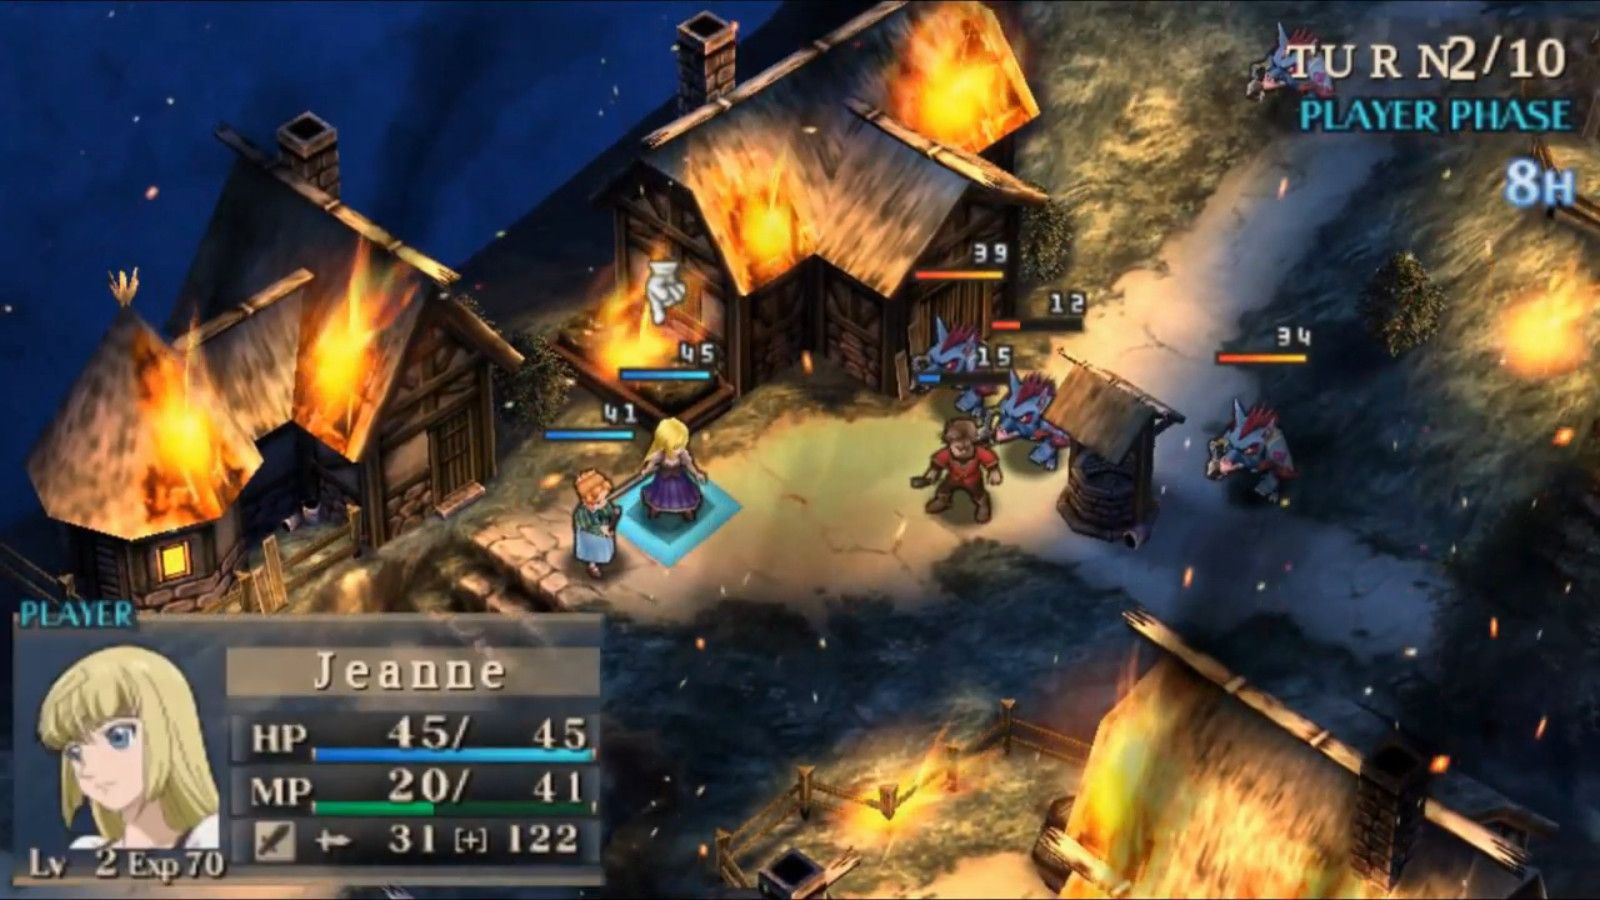 Gameplay in Jeanne D'Arc is turn-based in this tactical fighter.